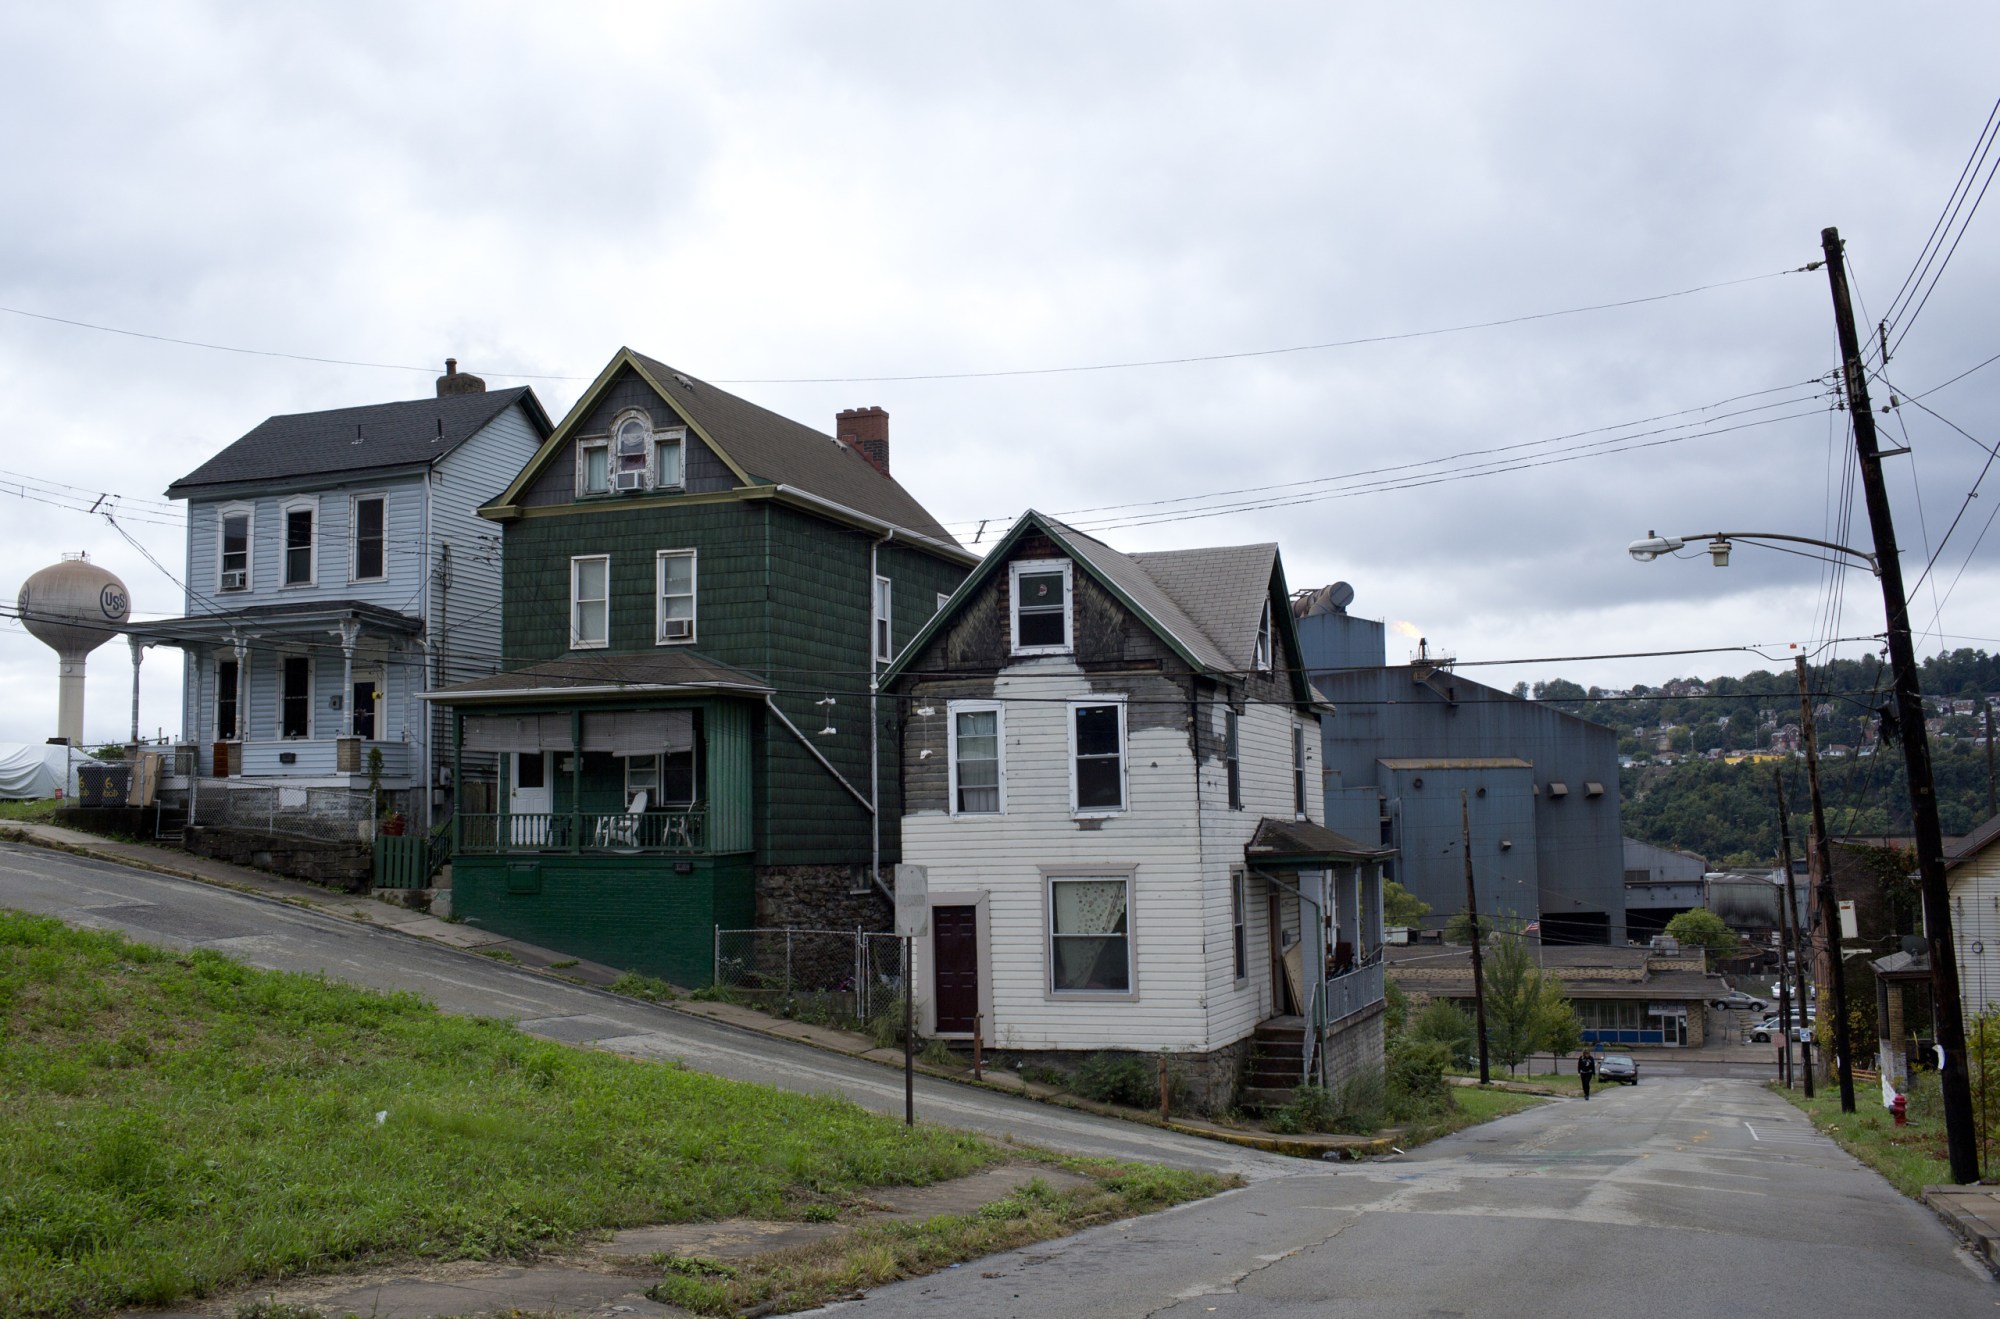 A street in the once-thriving town of Braddock, Pennsylvania, which faced economic decline following the closure of its steal mills, on October 13, 2016. (Getty/Andrew Lichtenstein)